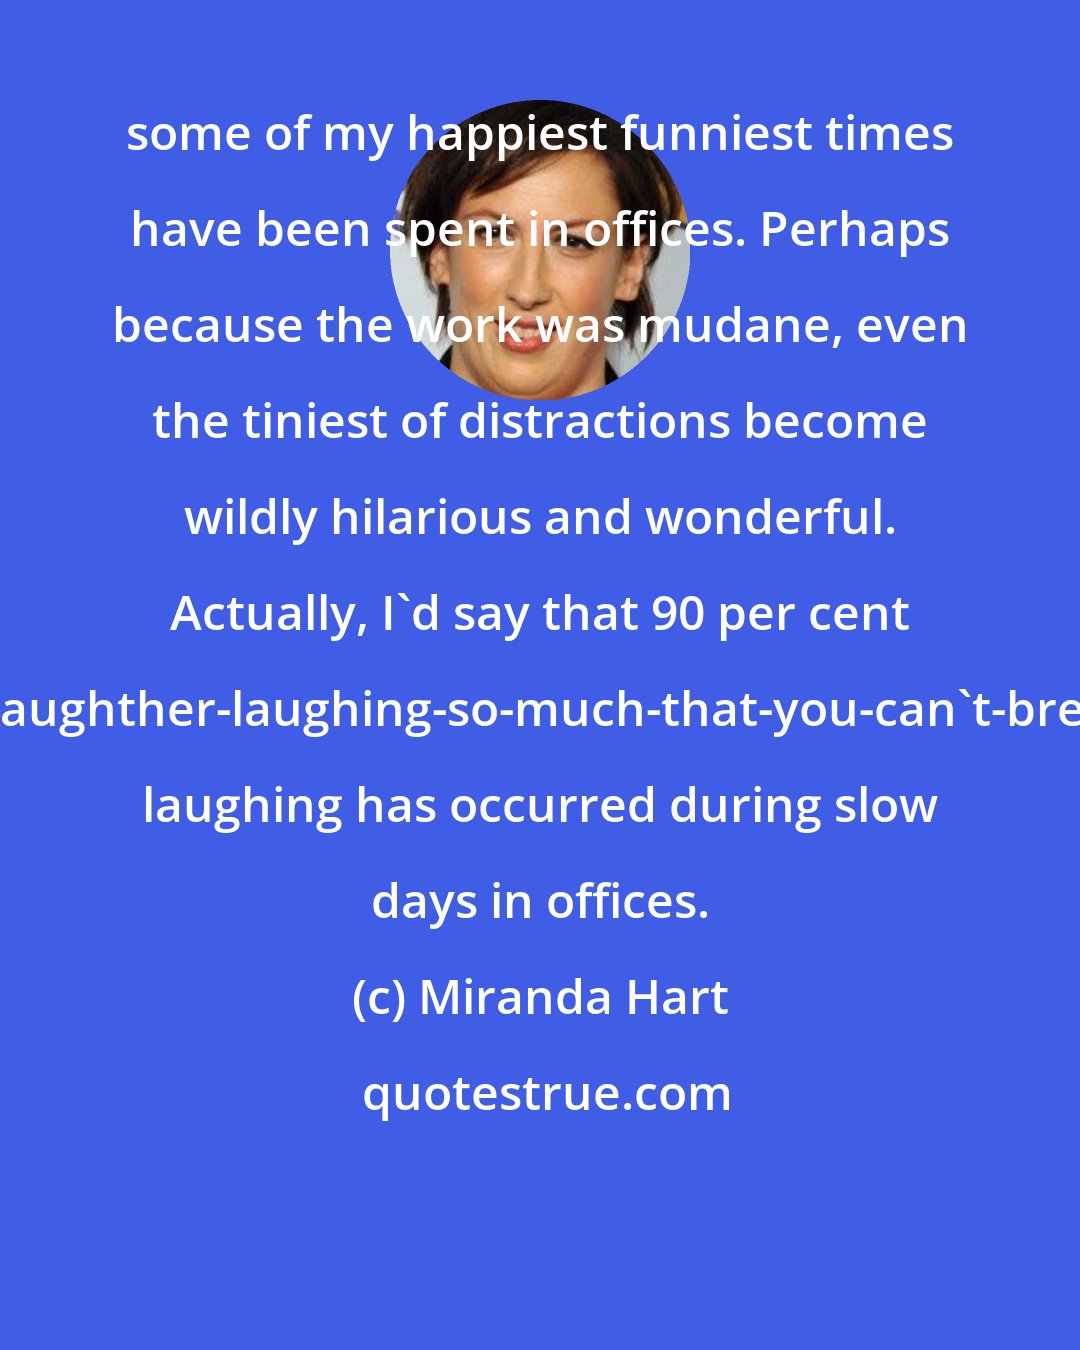 Miranda Hart: some of my happiest funniest times have been spent in offices. Perhaps because the work was mudane, even the tiniest of distractions become wildly hilarious and wonderful. Actually, I'd say that 90 per cent of my doubled-over-gasping-with-laughther-laughing-so-much-that-you-can't-breathe-and-you-think-you-might-die laughing has occurred during slow days in offices.